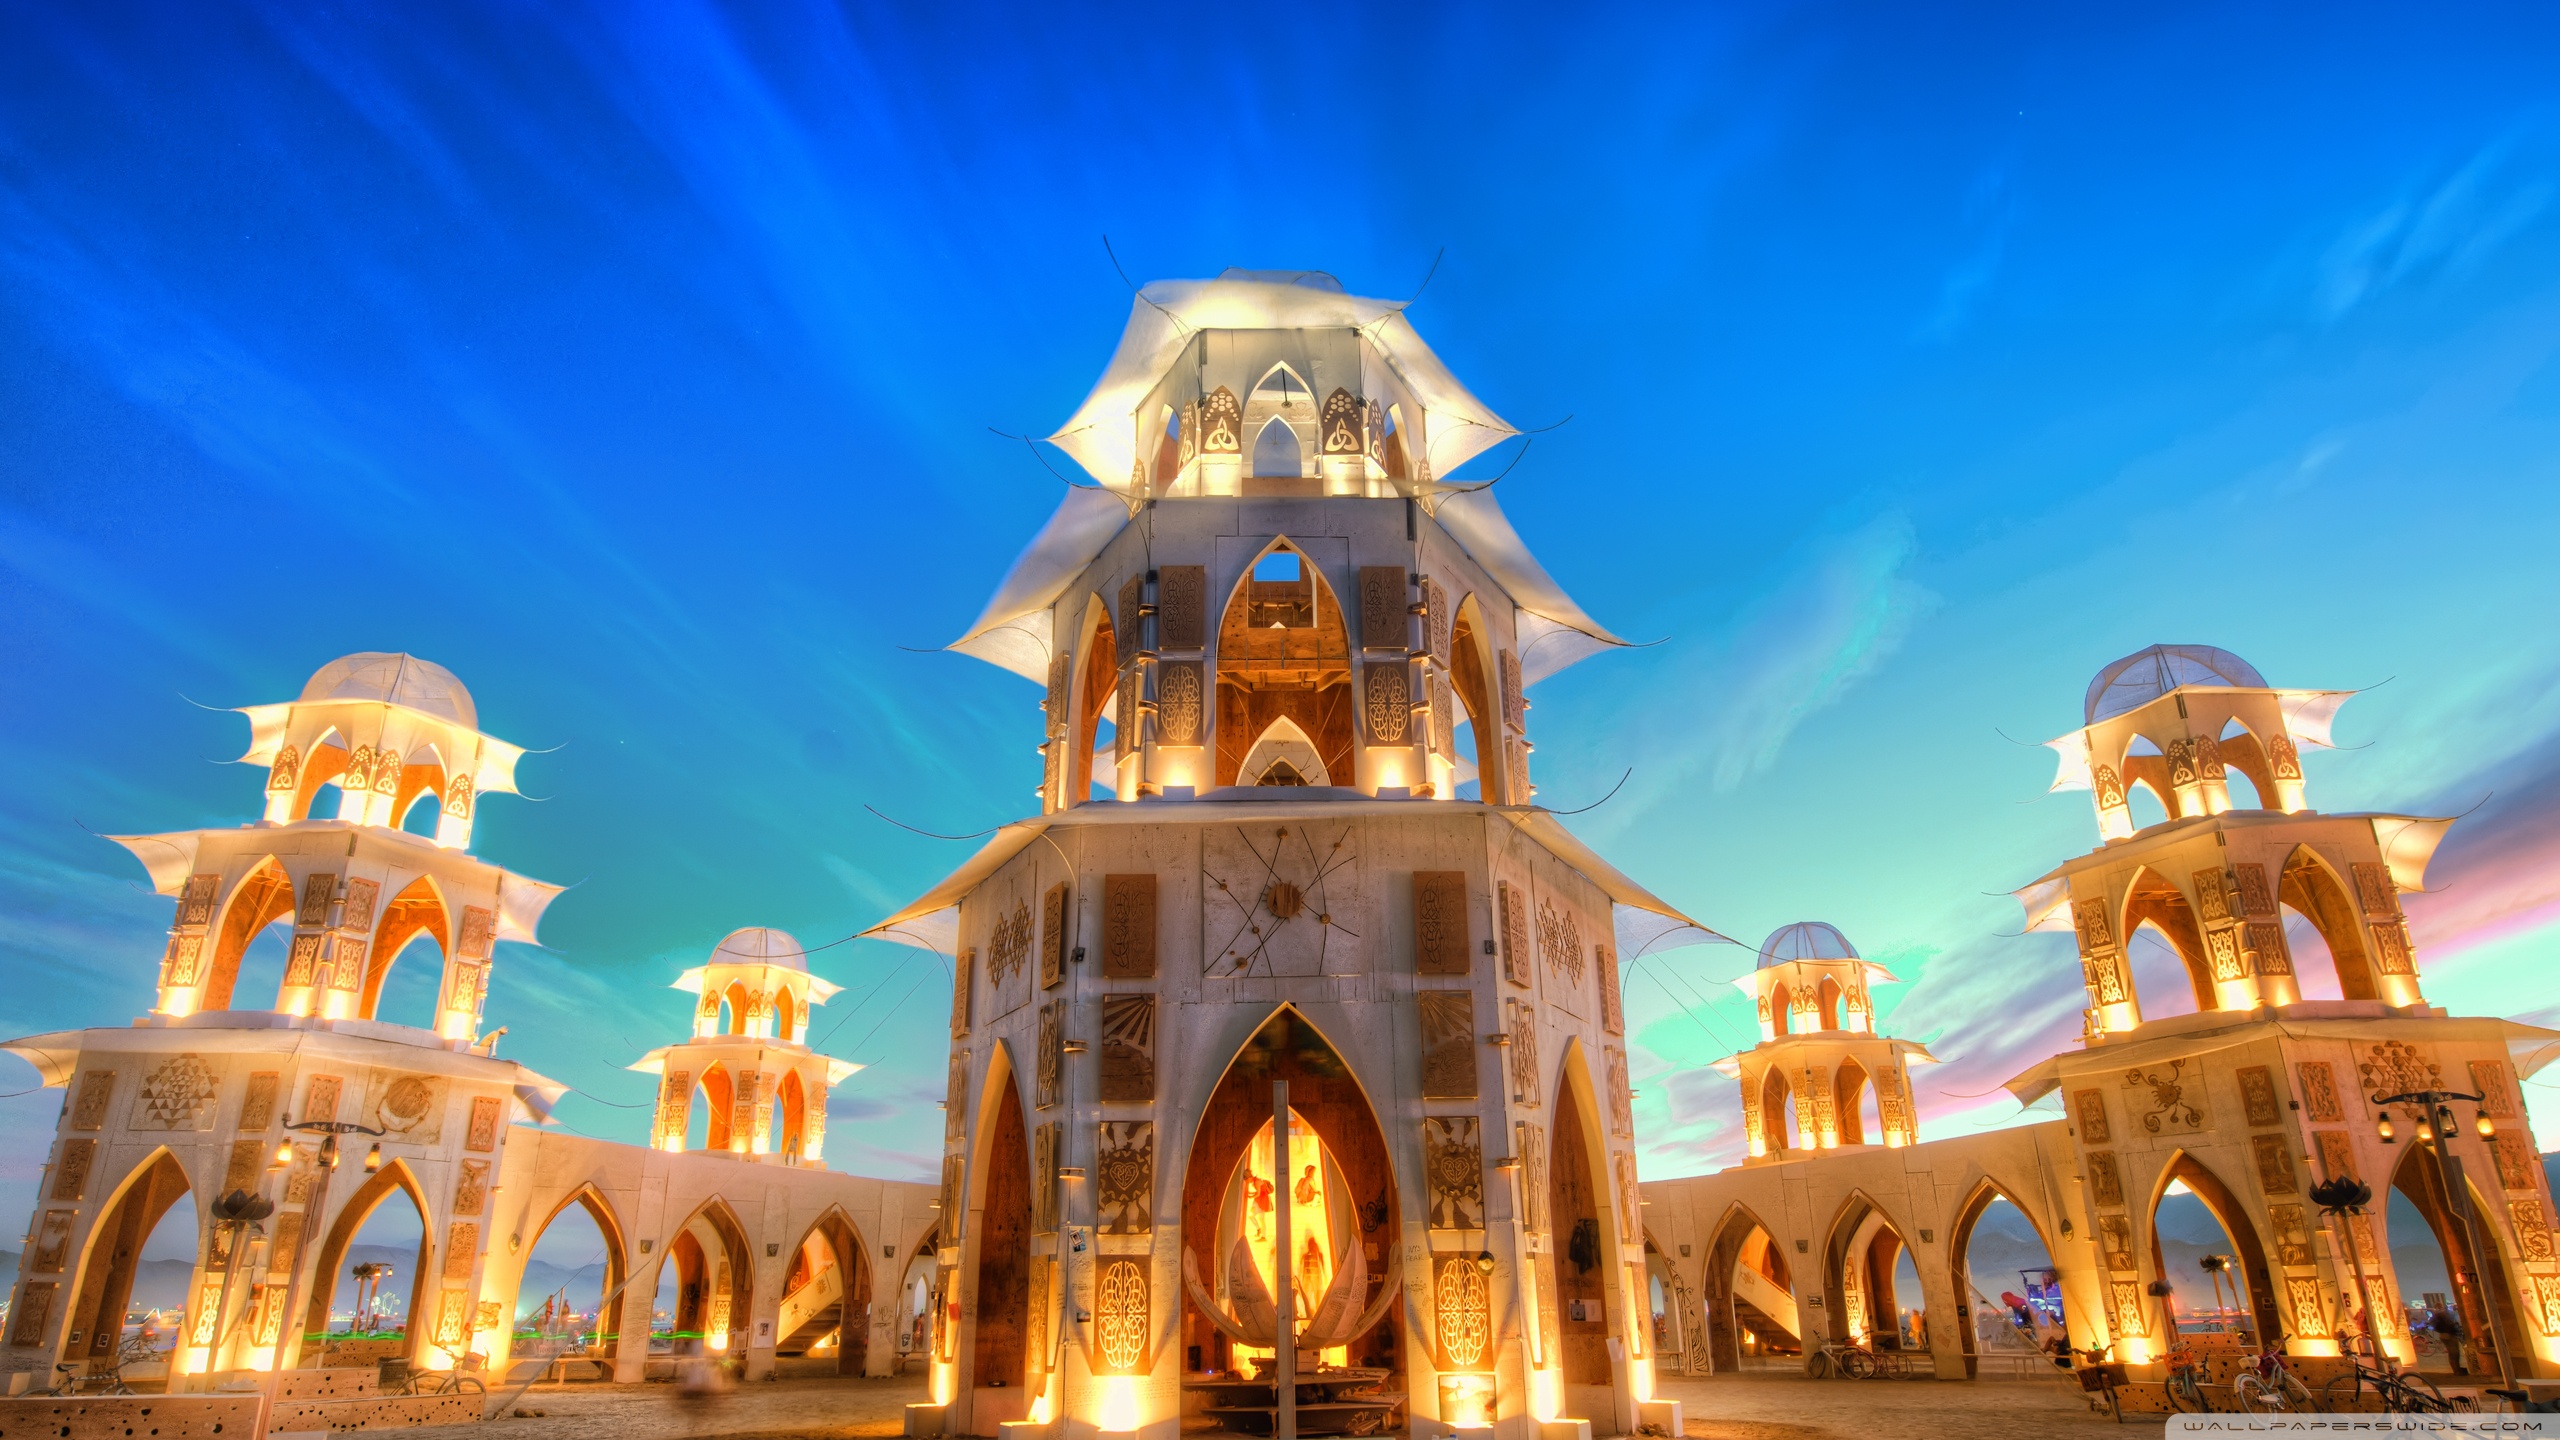 Mobile - Buildings Of Burning Man , HD Wallpaper & Backgrounds